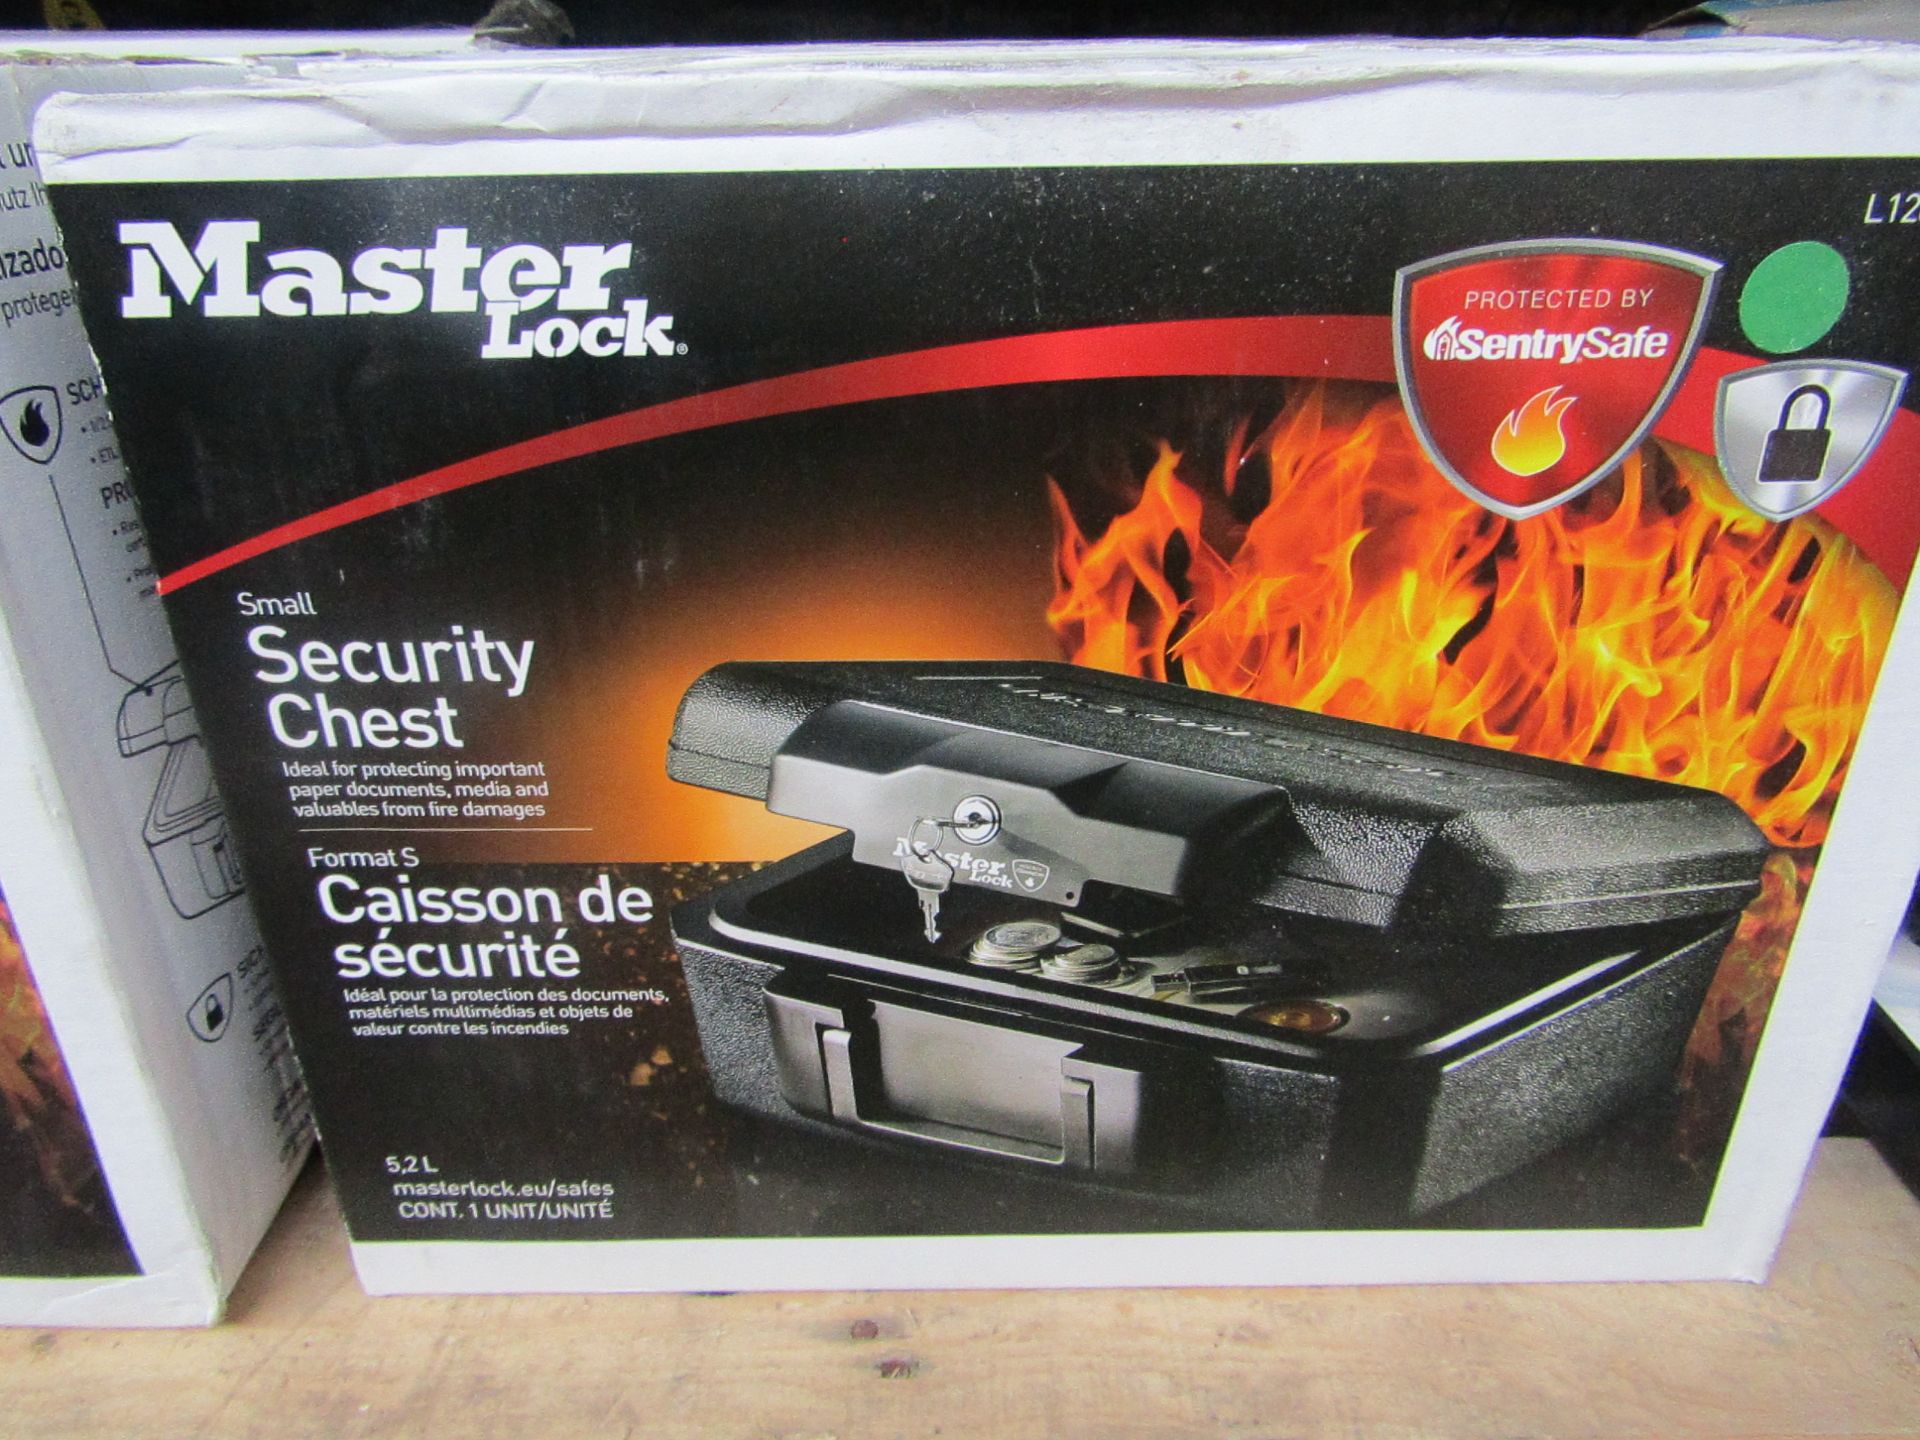 Master - Small Security Chest (Protected By SentrySafe) 5.2L - New.